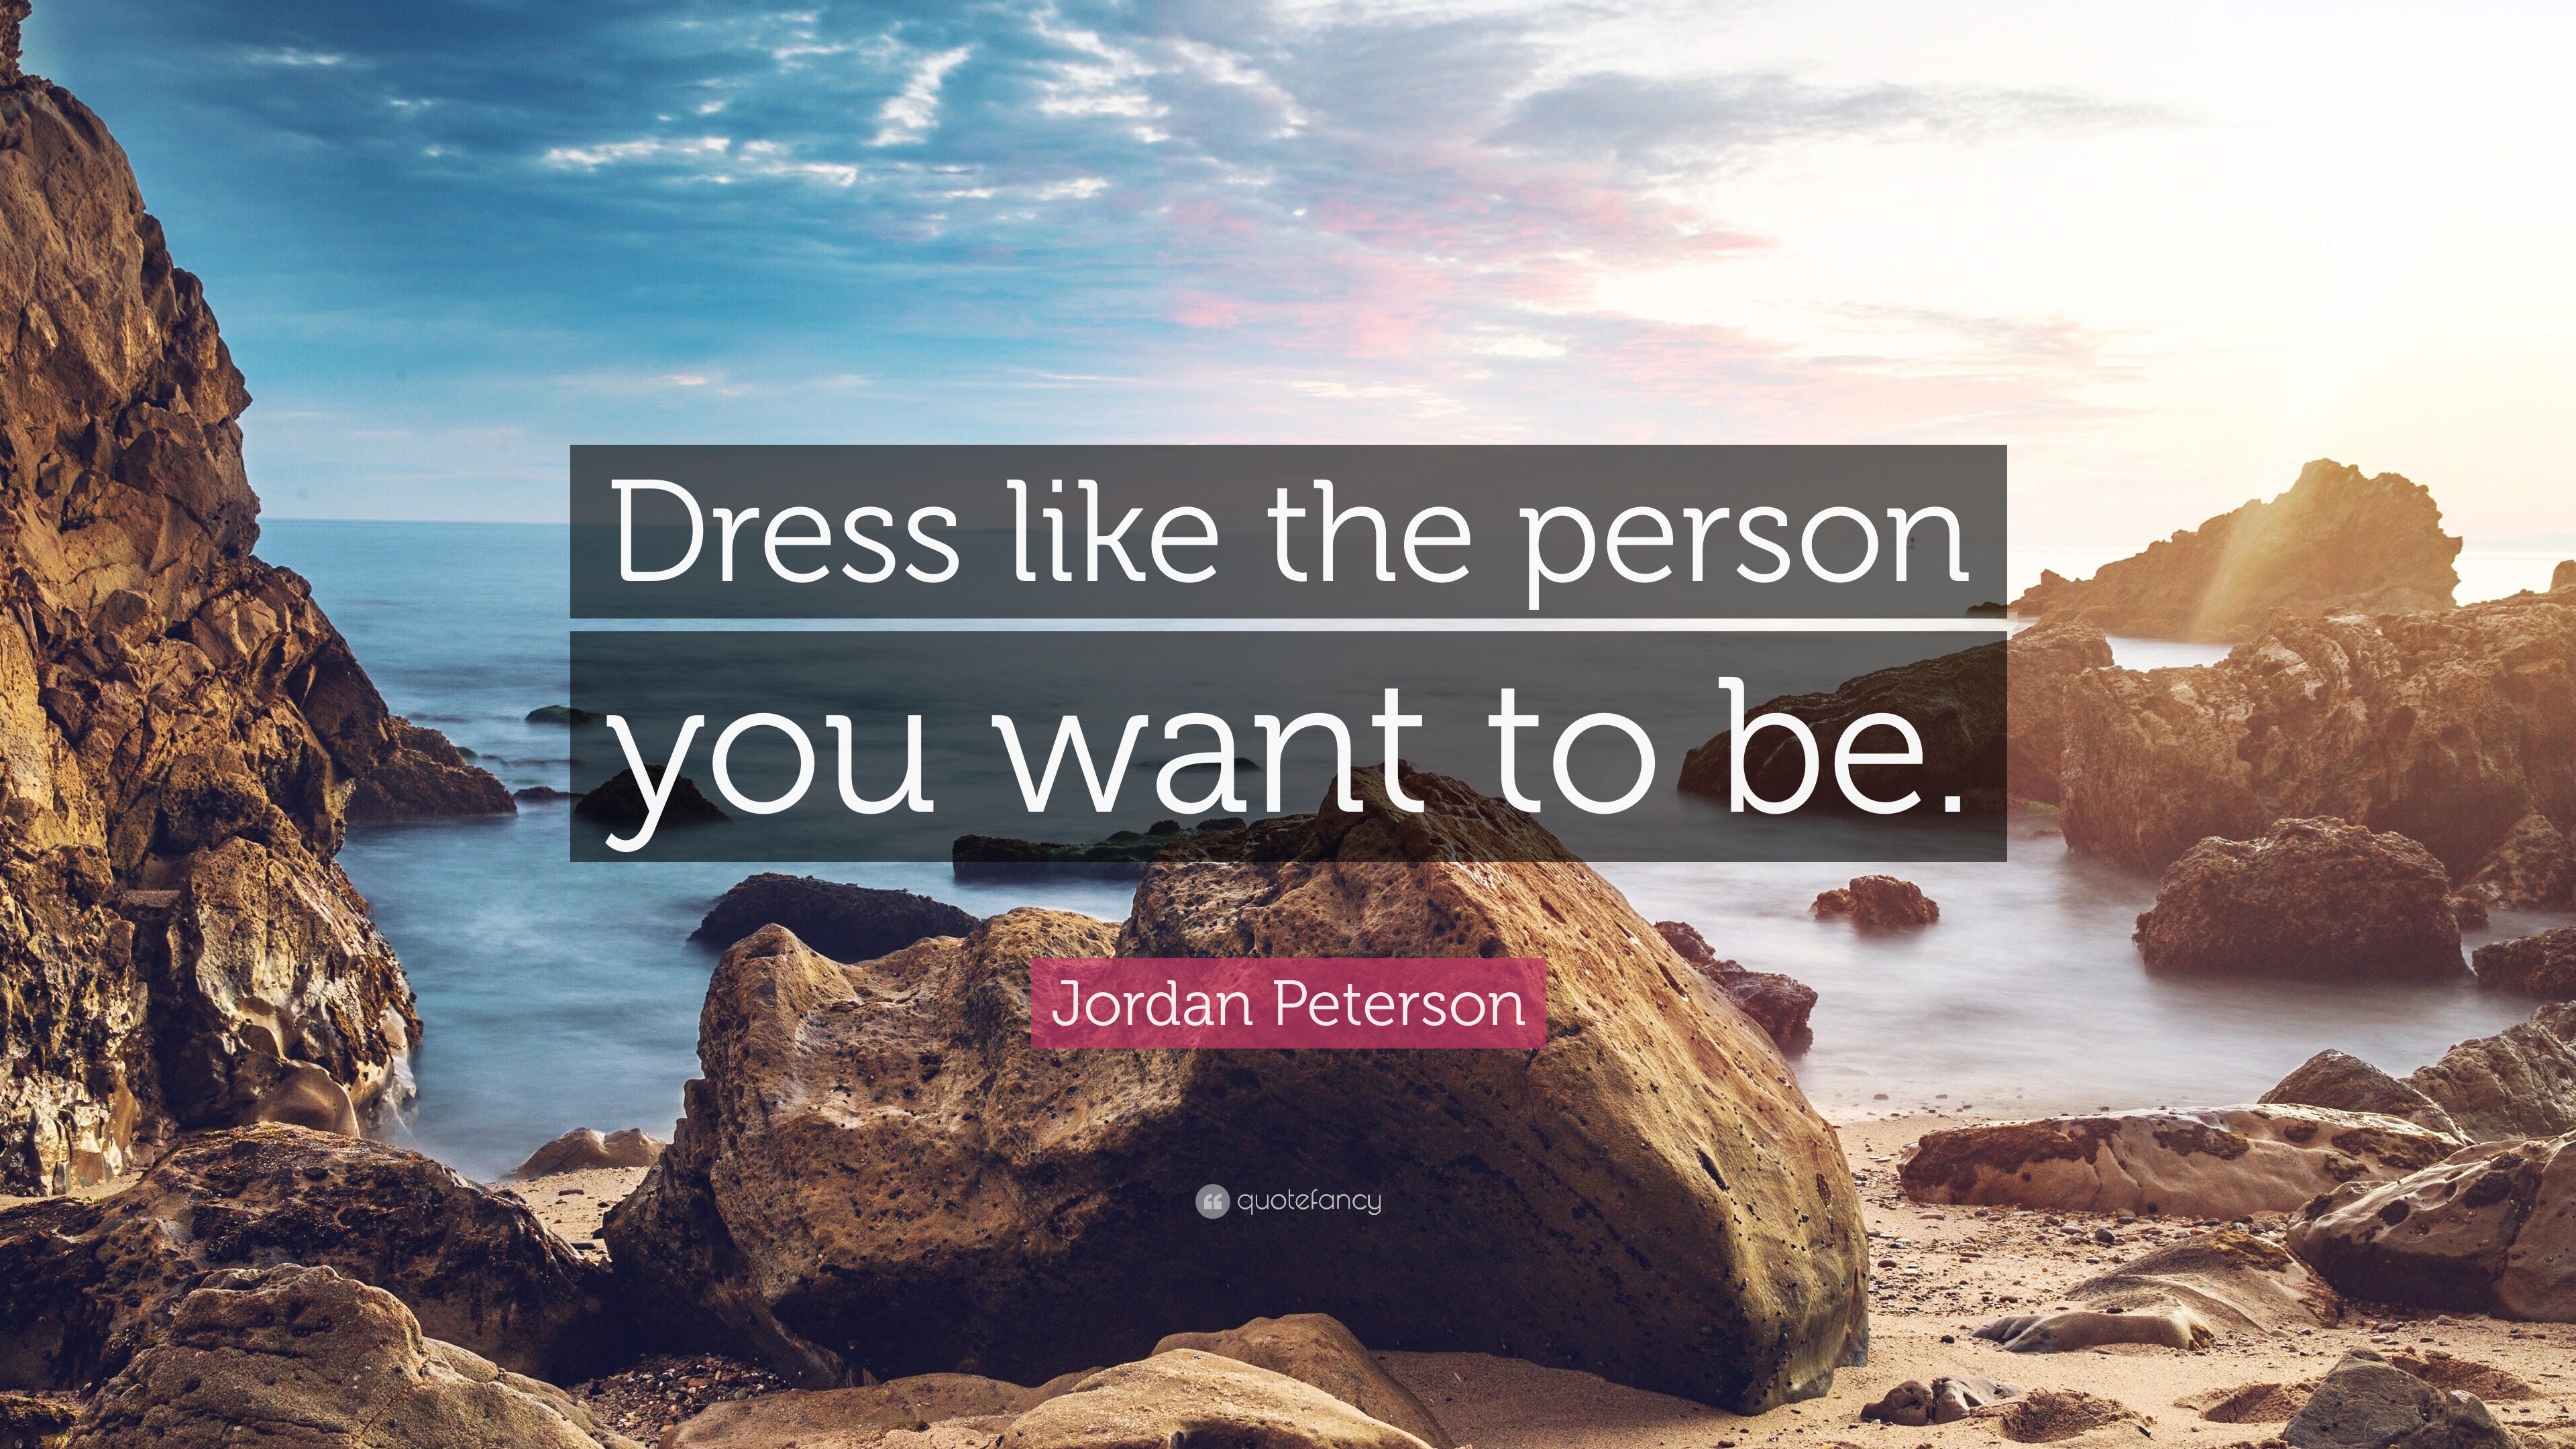 7442848 Jordan Peterson Quote Dress like the person you want to be